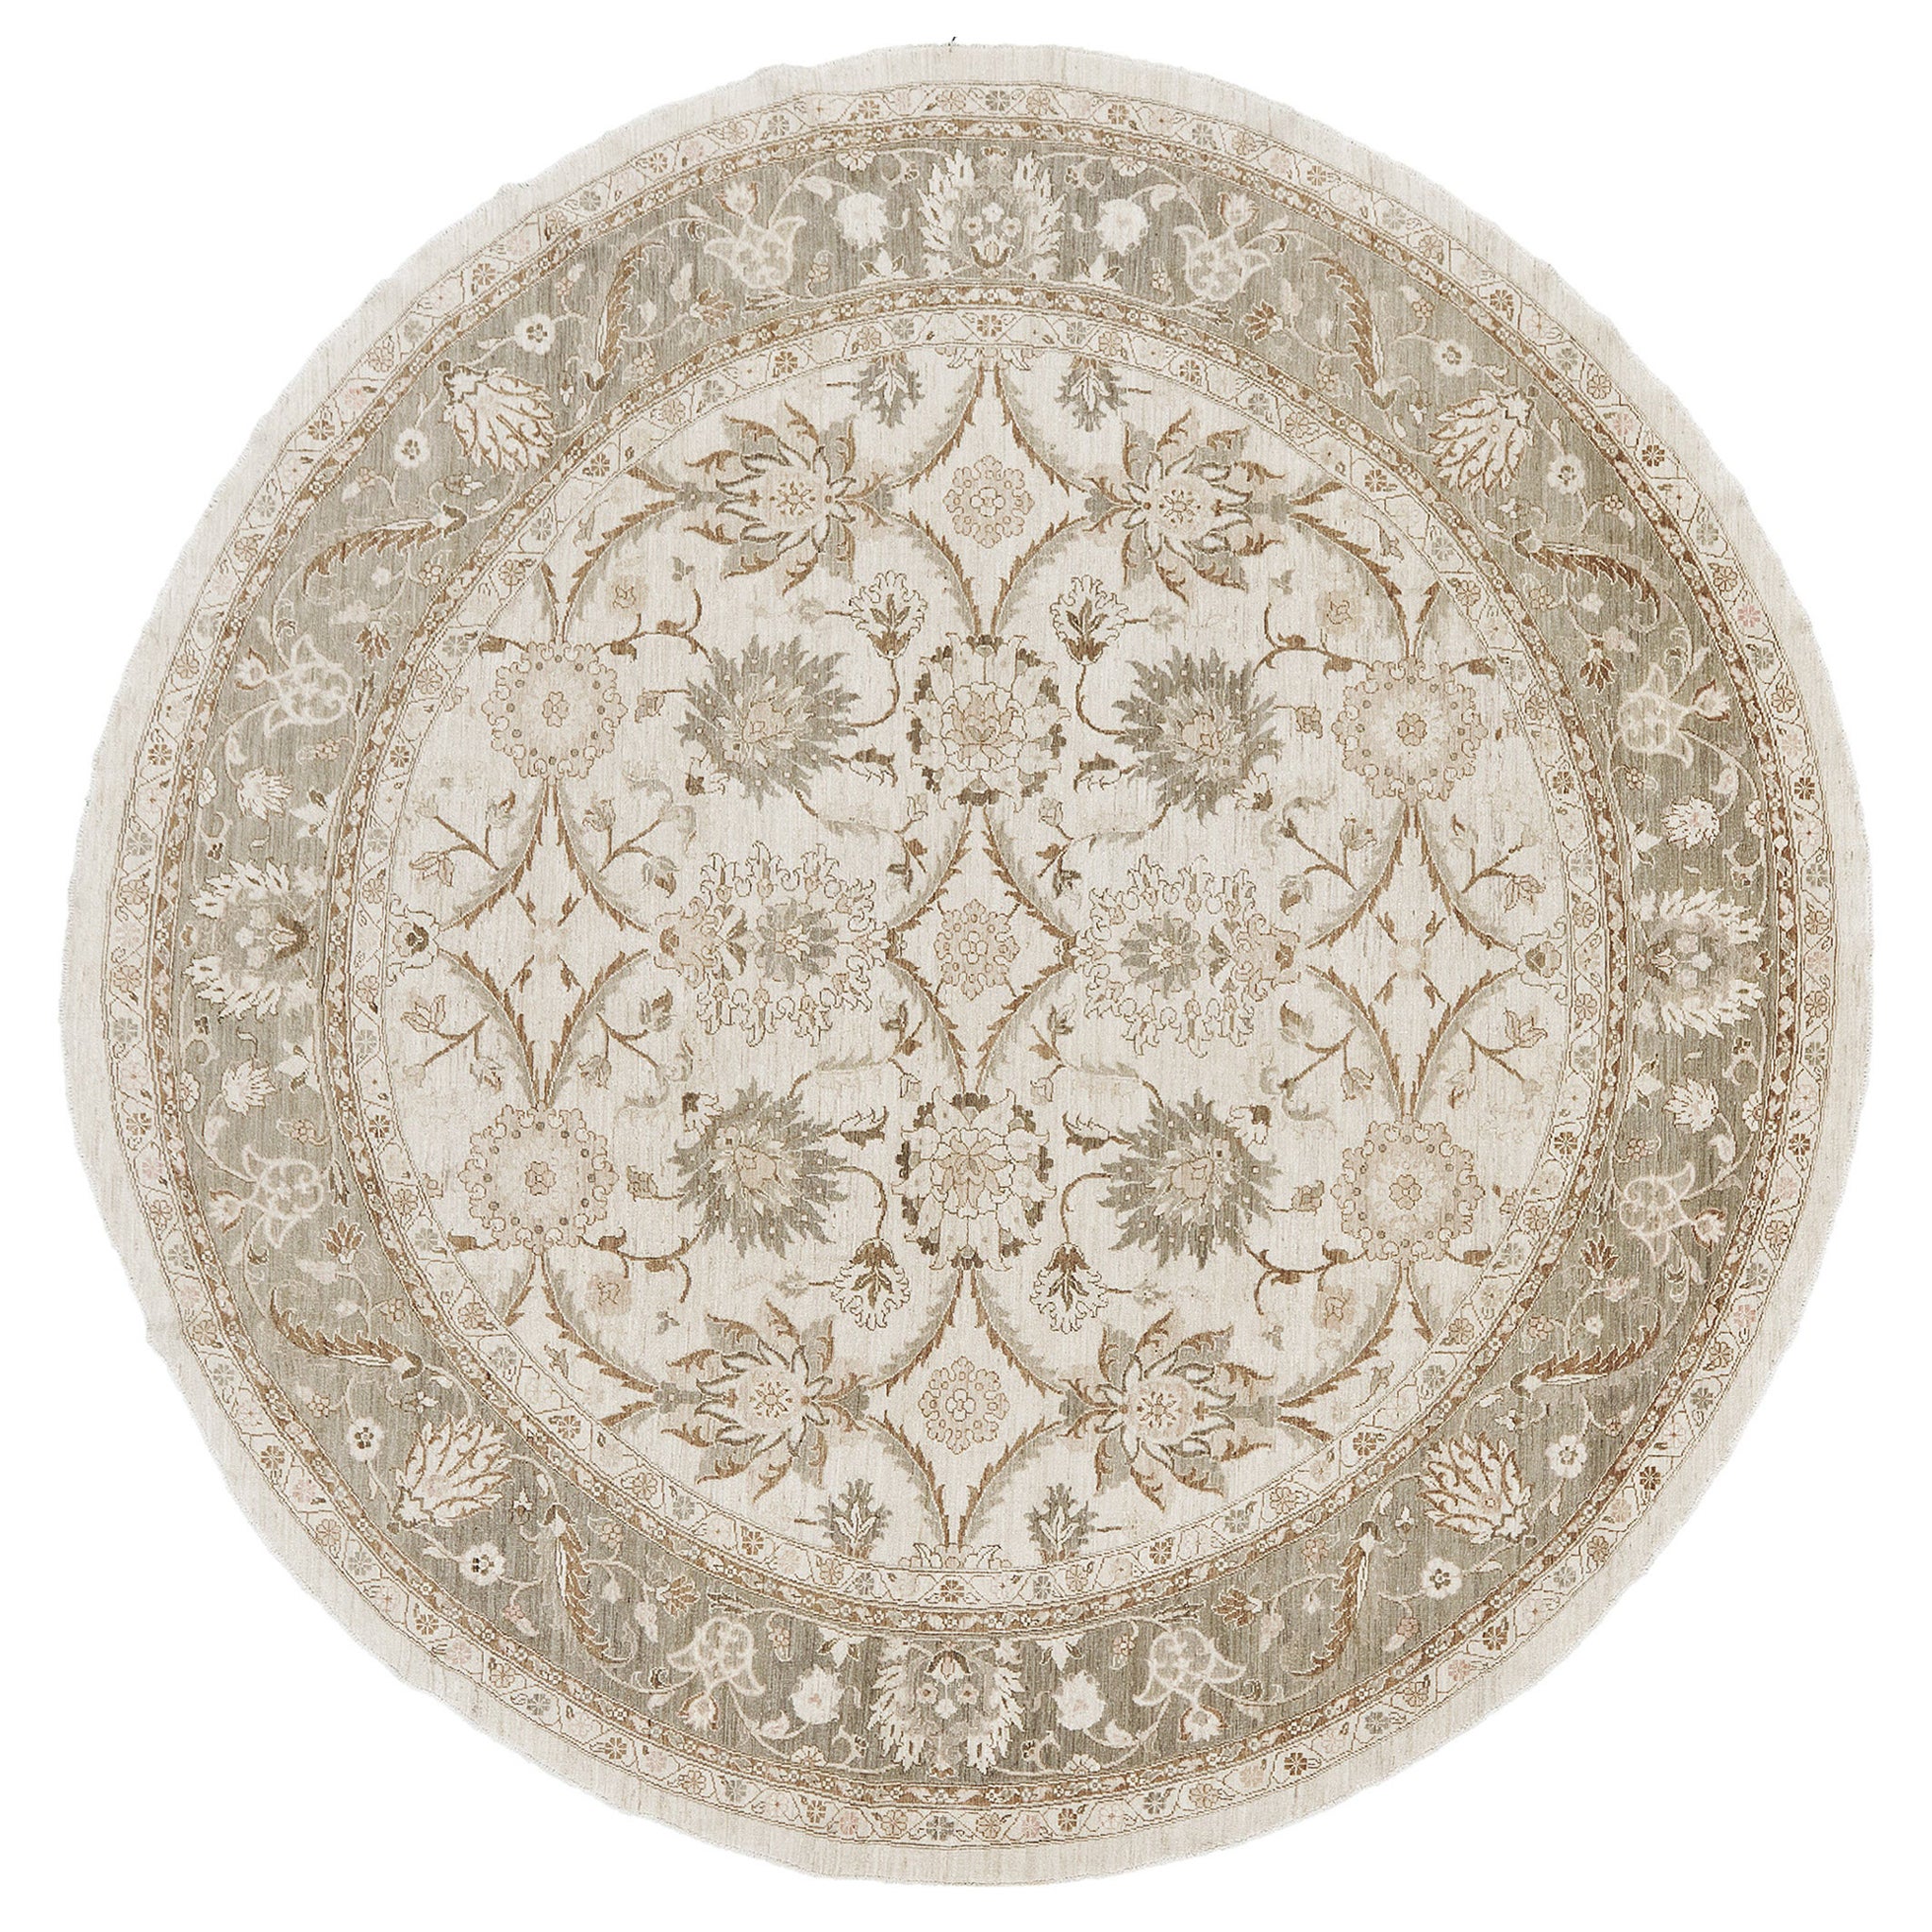 Tapis rond Sultanabad Revive de style vintage